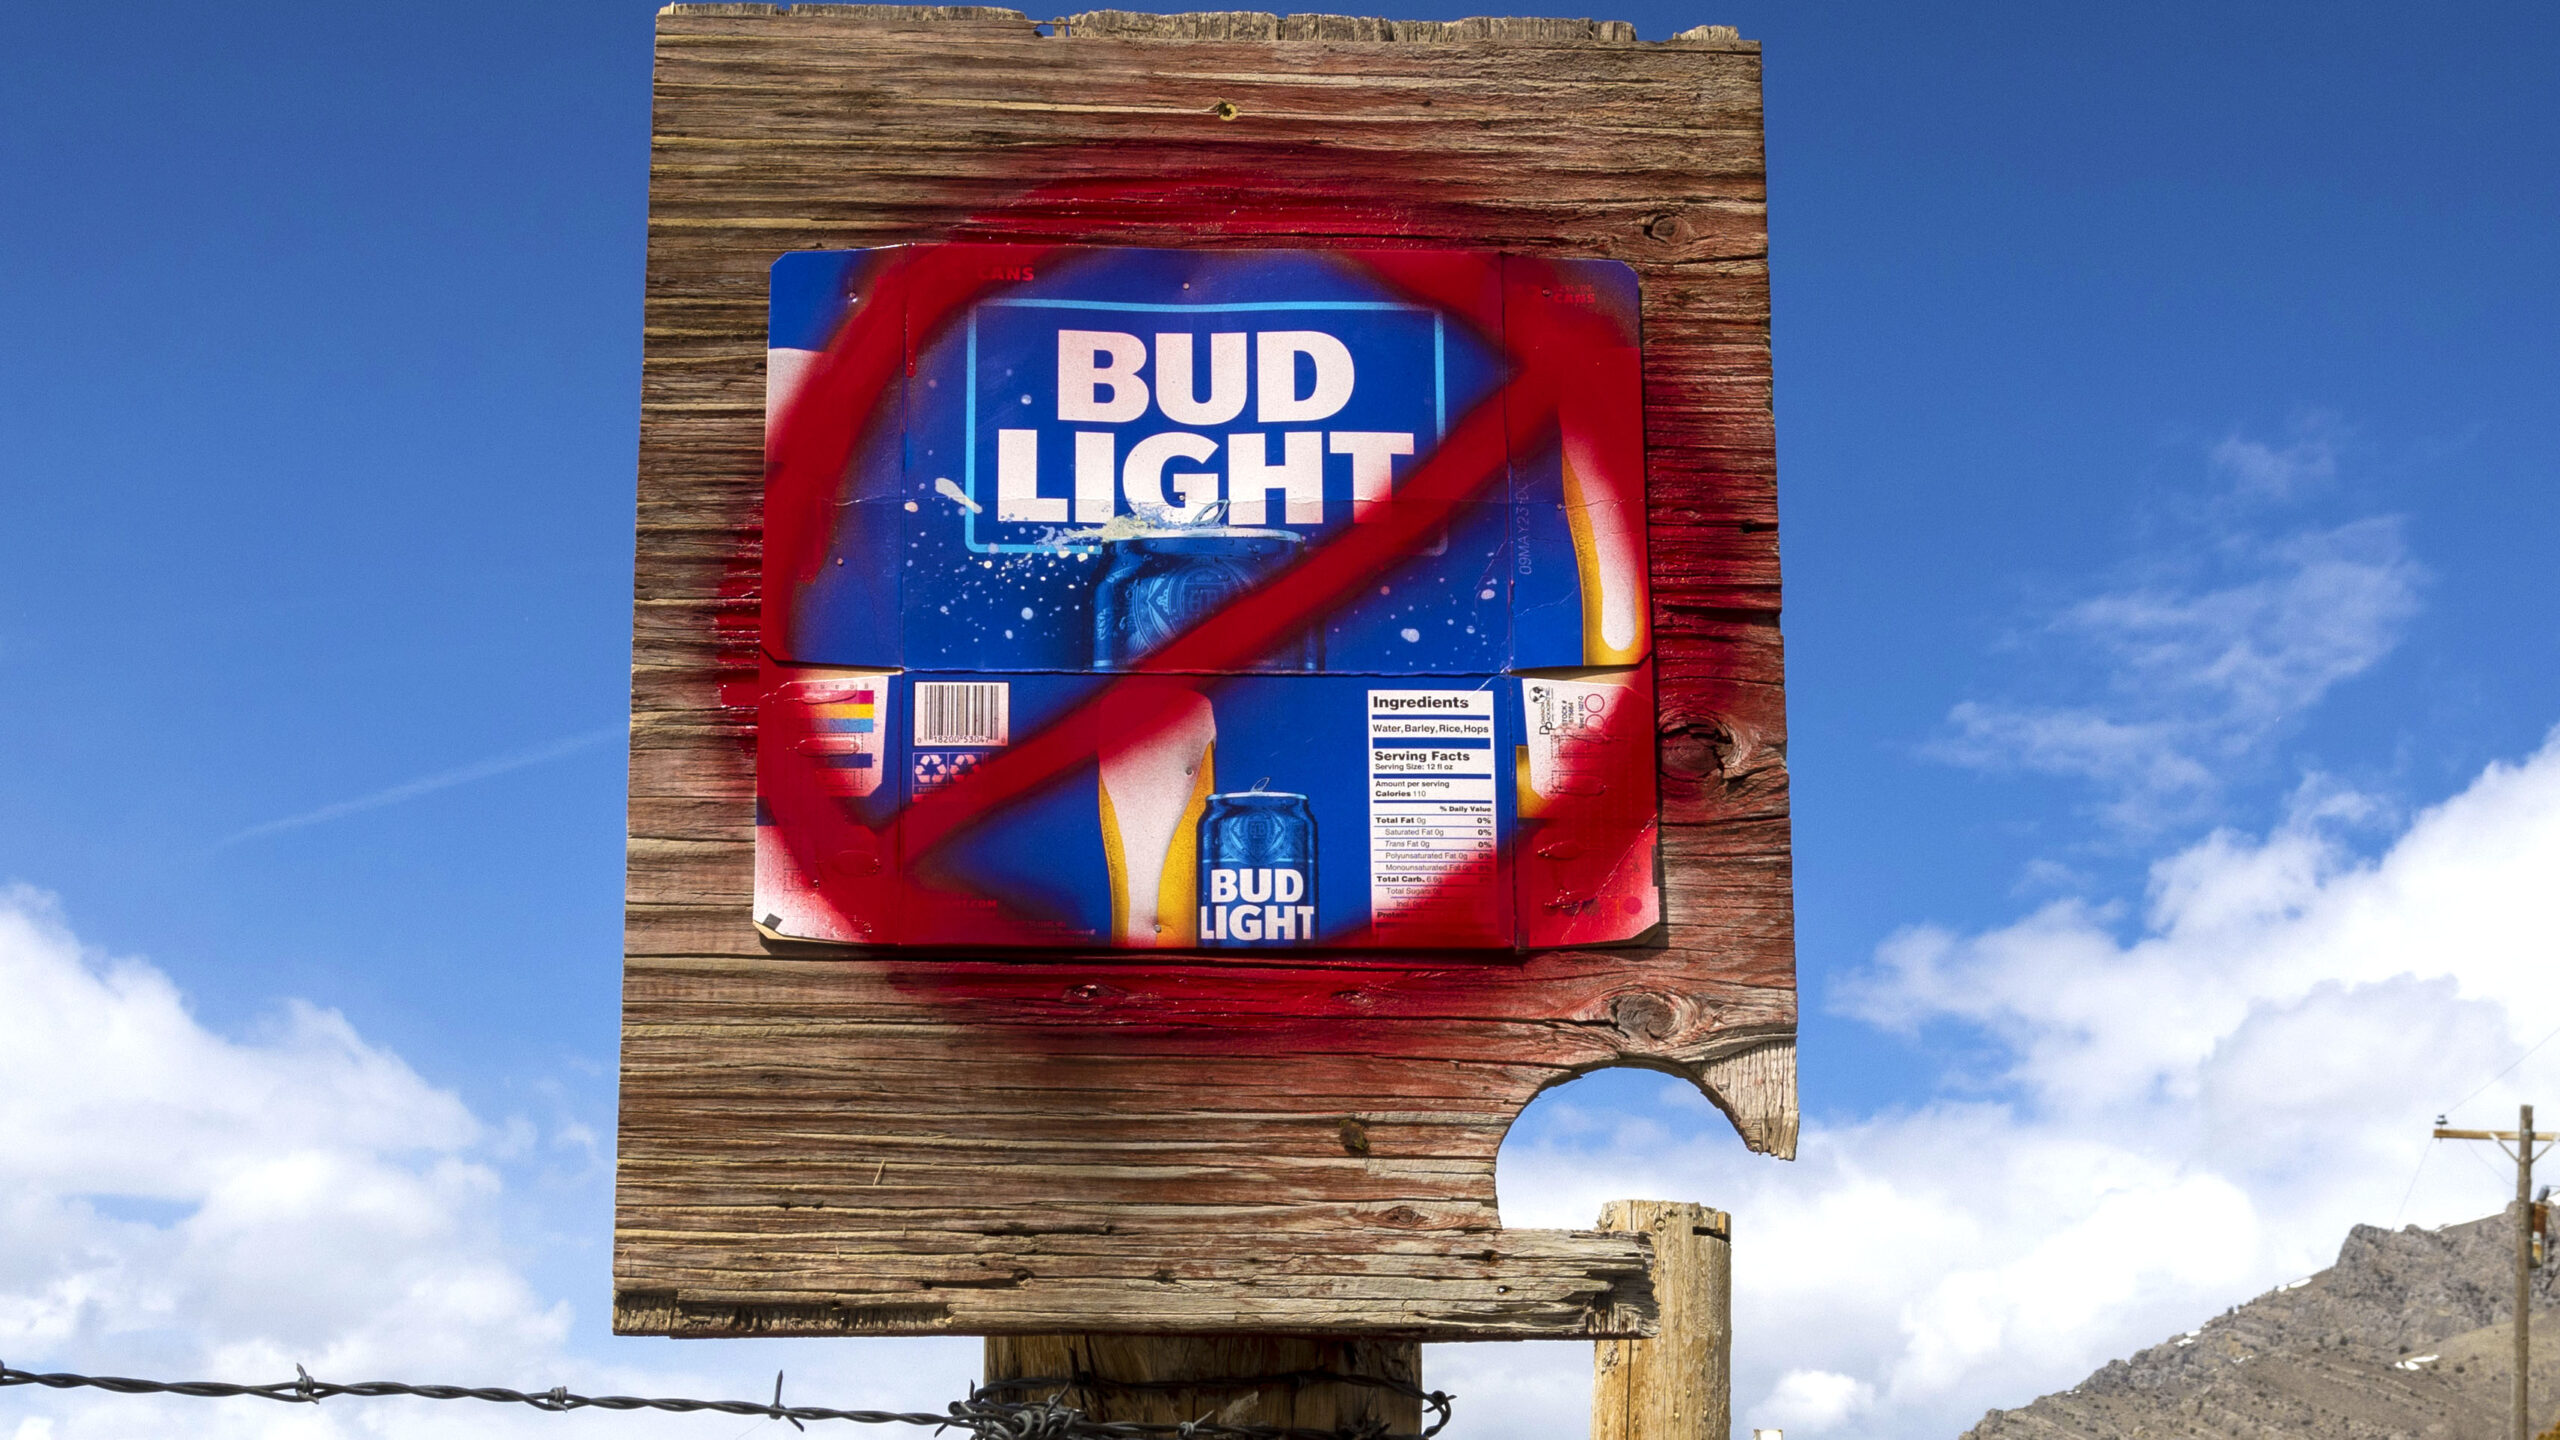 Bud Light Pours Have Plummeted At Bars, Restaurants Across U.S.: Beer Tech Company